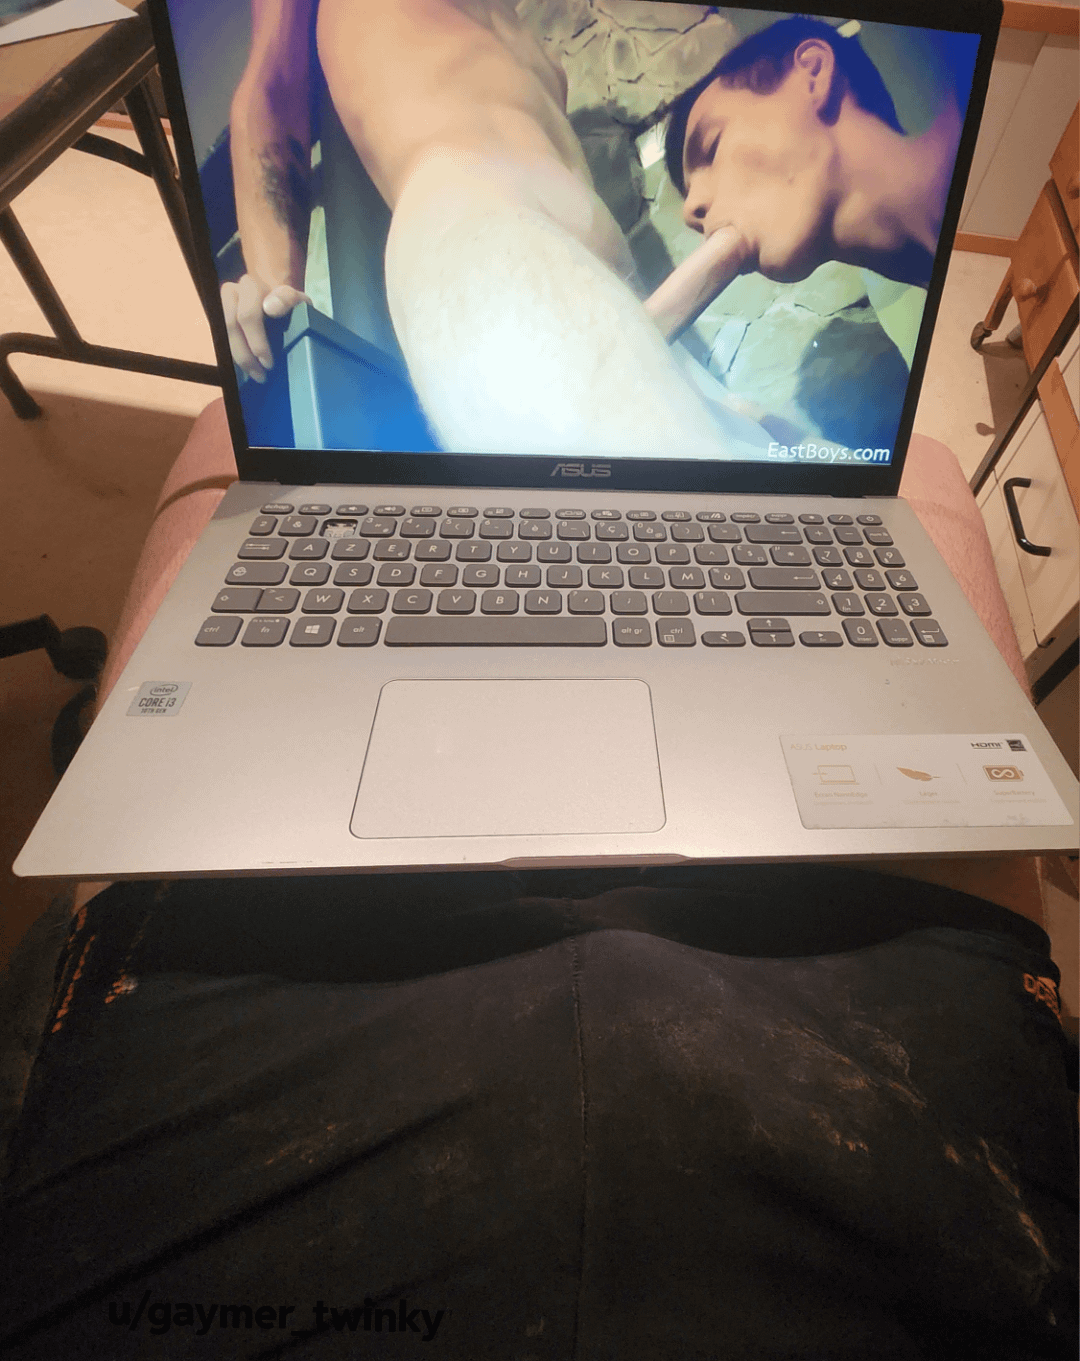 Nothing better than wearing your cumrag and watching porn